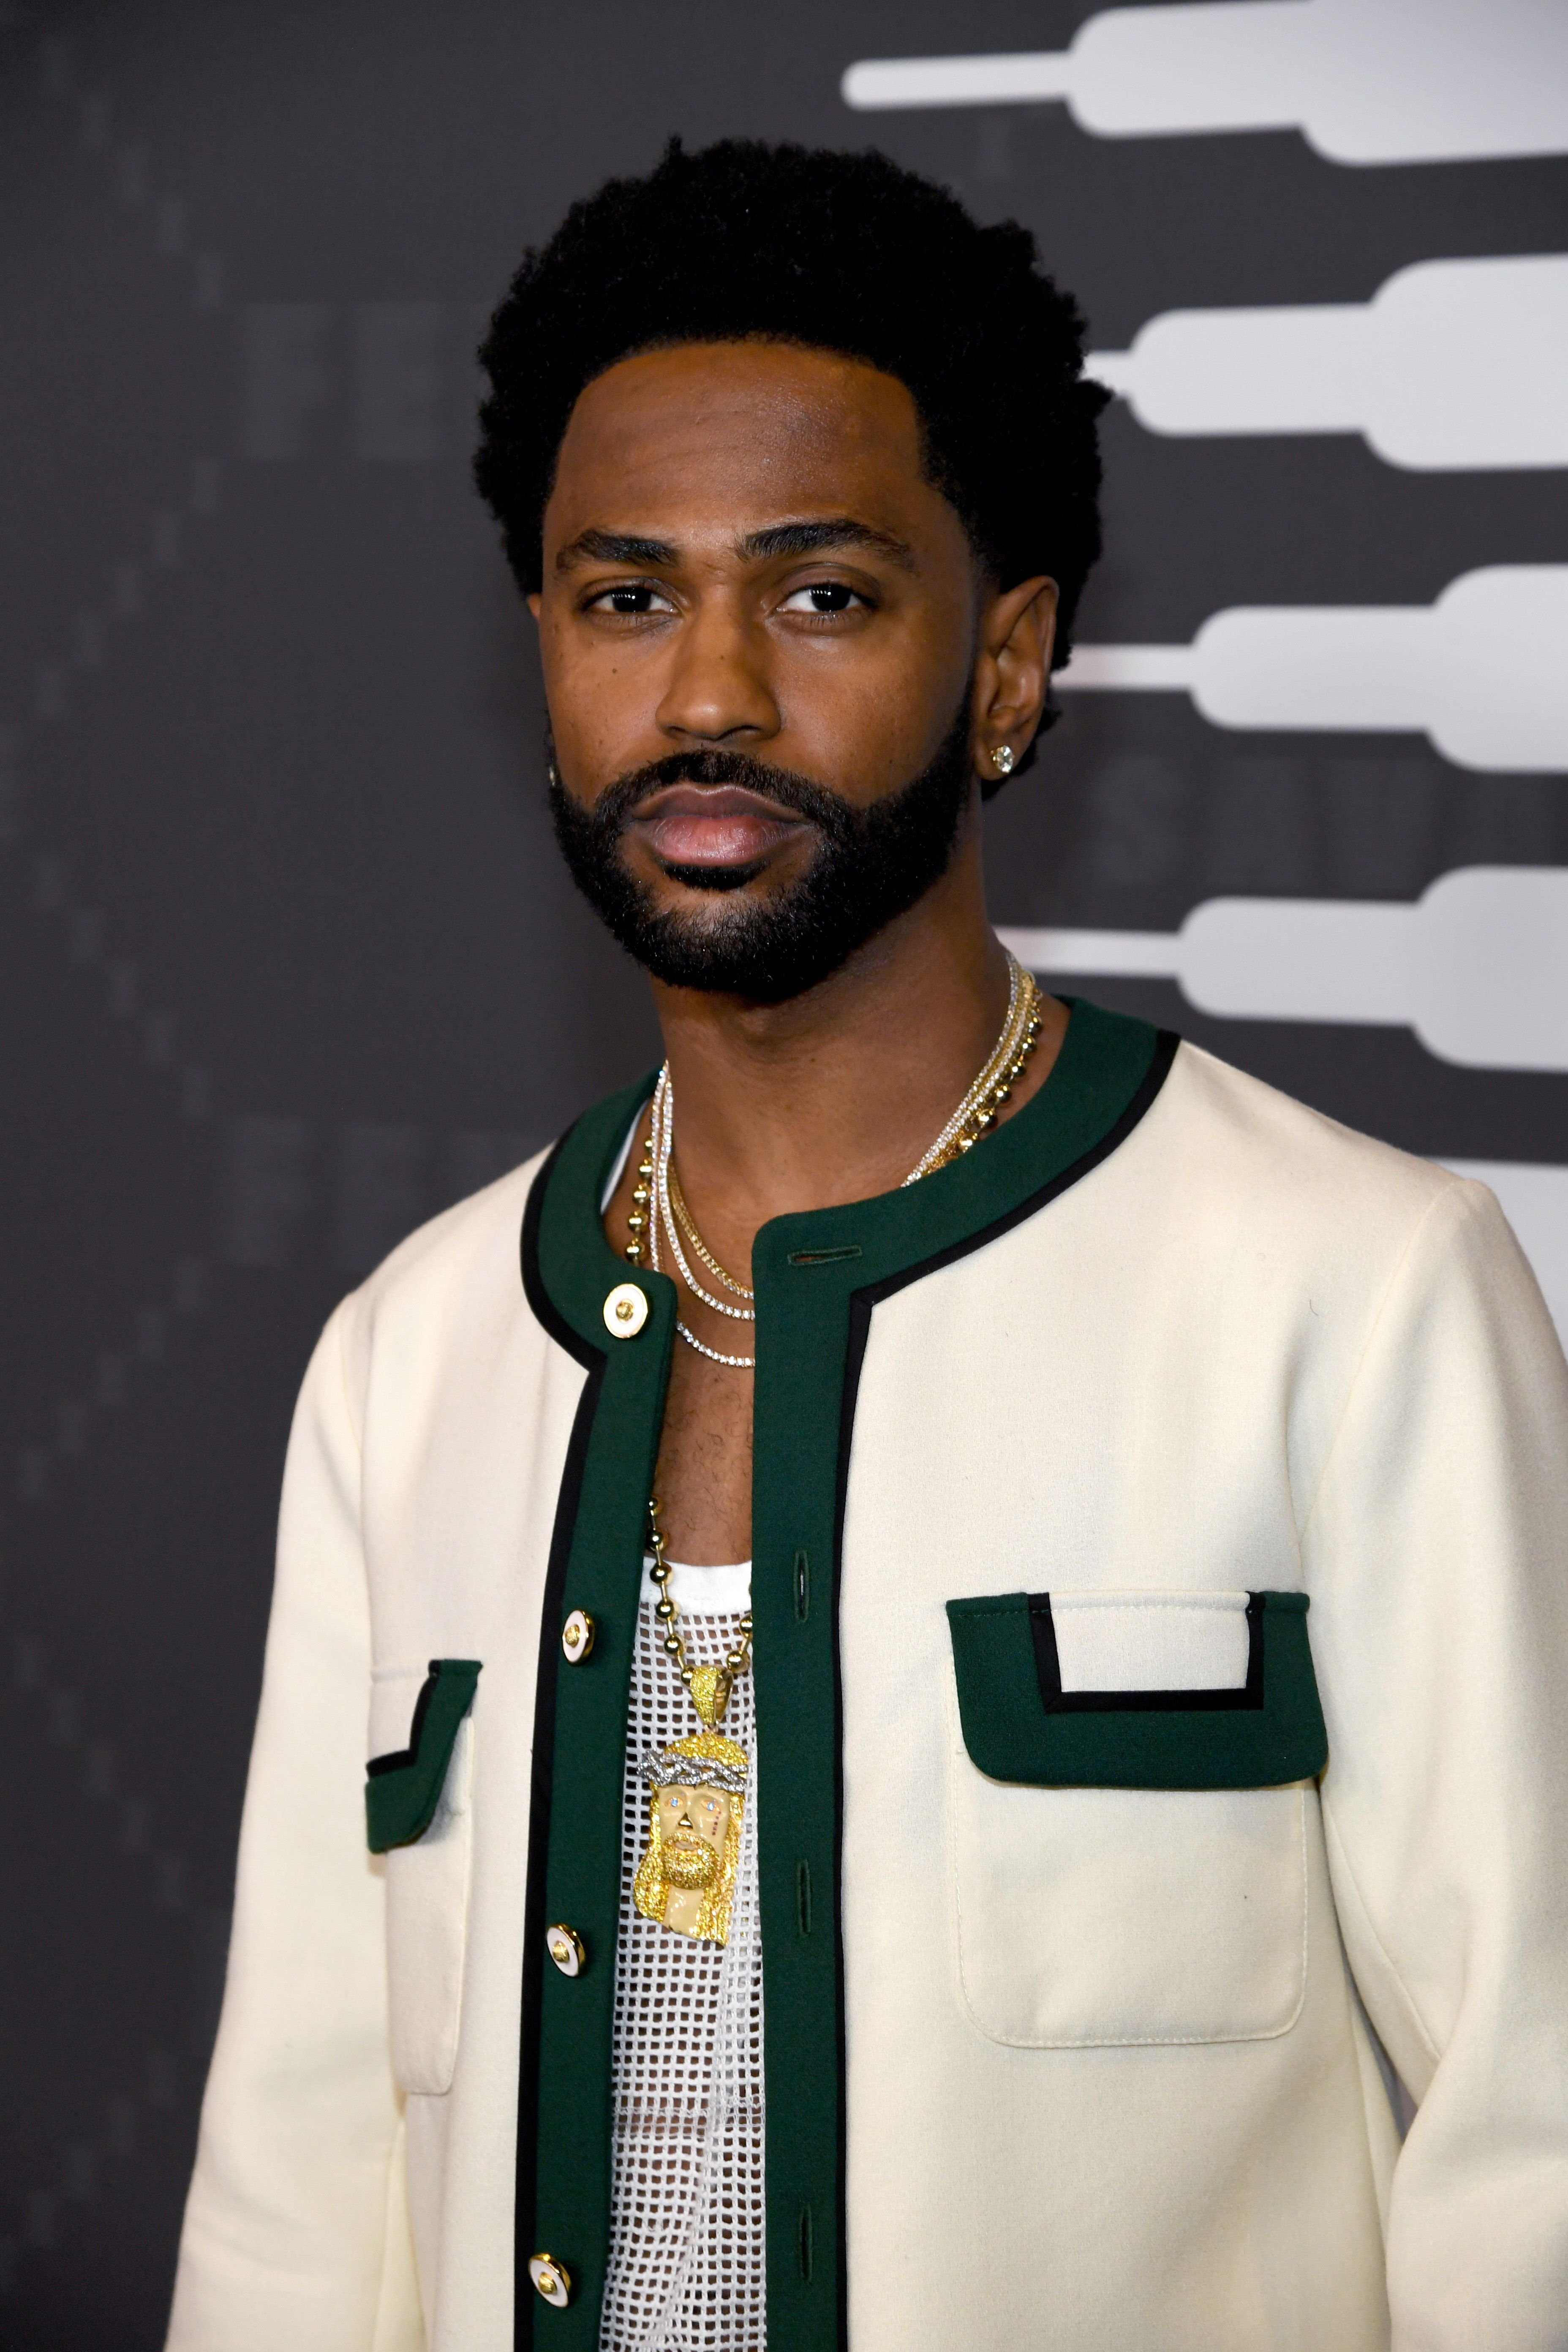 Big Sean at the Savage X Fenty Show Presented By Amazon Prime Video - Arrivals on September 10, 2019 | Photo: Getty Images